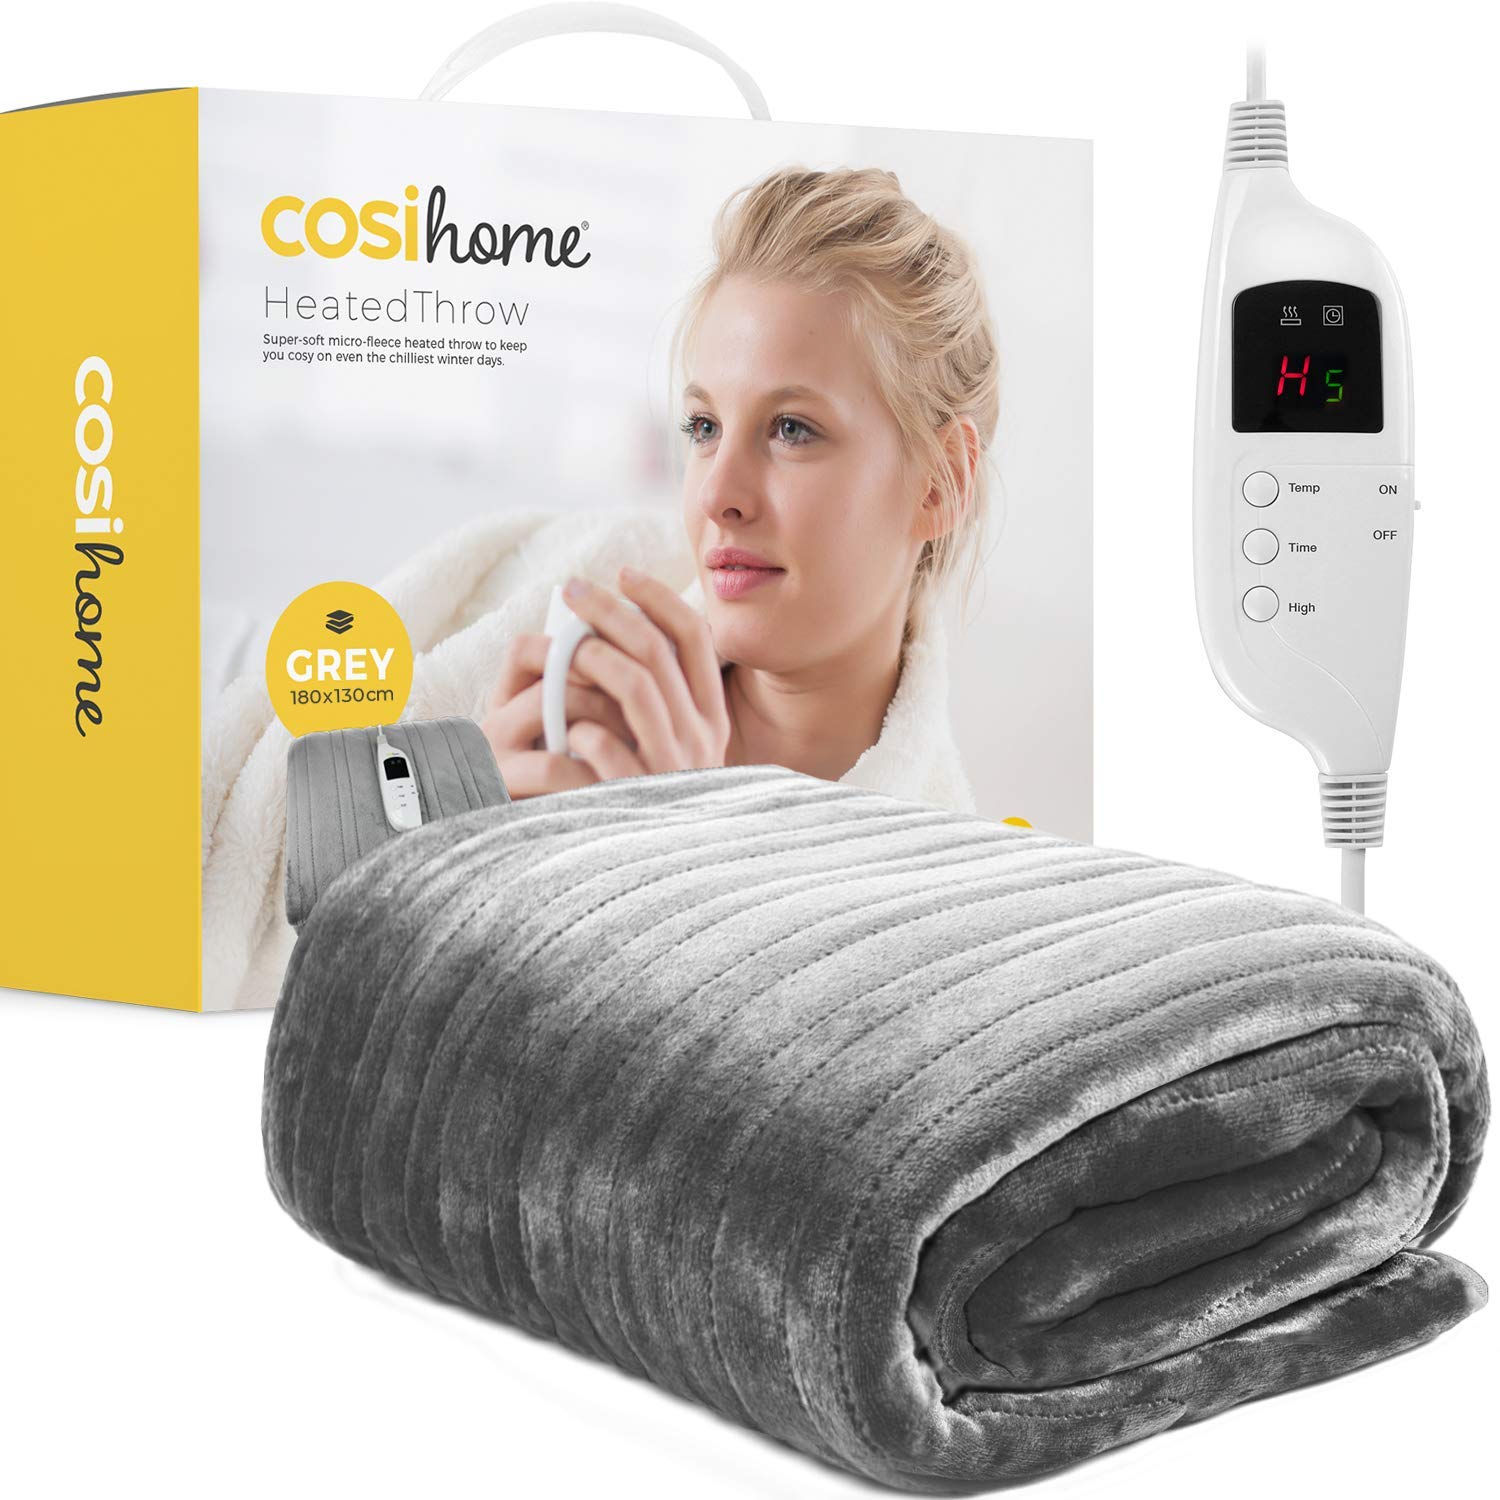 Cosi Home® Heated Throw - Electric Blanket - Extra Large Heated Blanket, Machine Washable Fleece with Digital Remote, Timer and 9 Heat Settings (Grey)